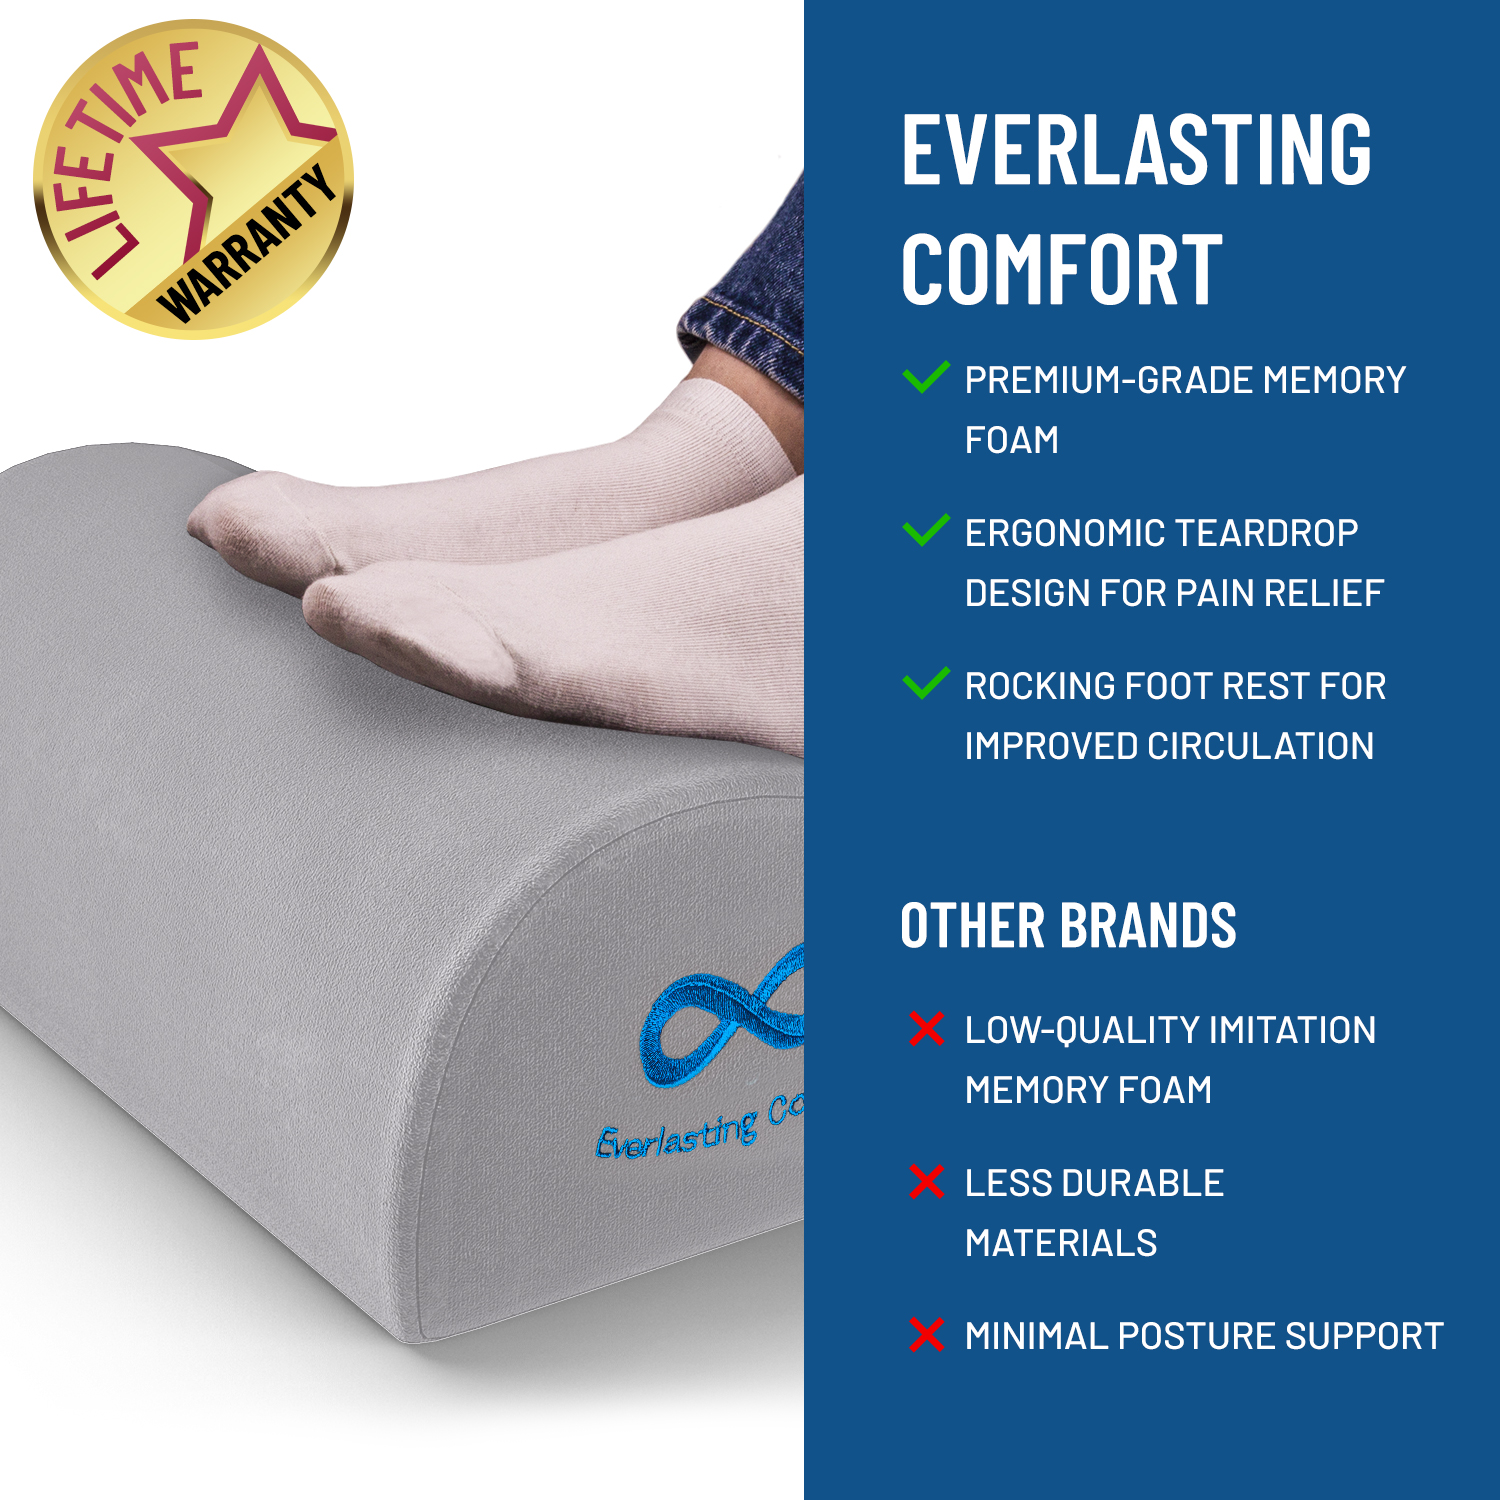 Everlasting Comfort Foot Rest for Under Desk - Kick up Your feet, Improve Circulation - Work from Home Memory Foam Footrest Pillow - Foot Stool for Office, Home, Gaming, Computer Accessories (Gray) - image 2 of 8